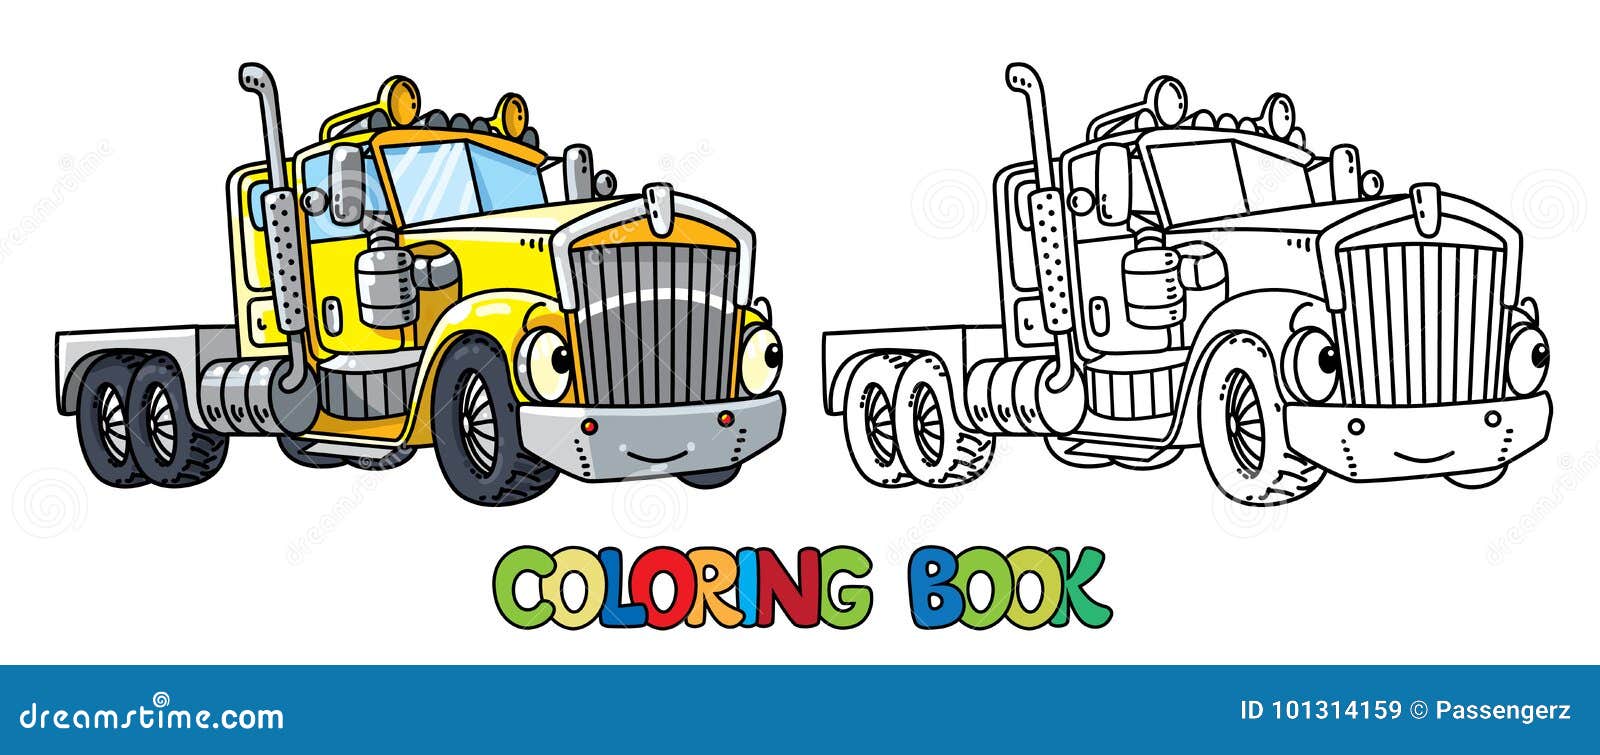 Funny heavy truck with eyes coloring book stock vector